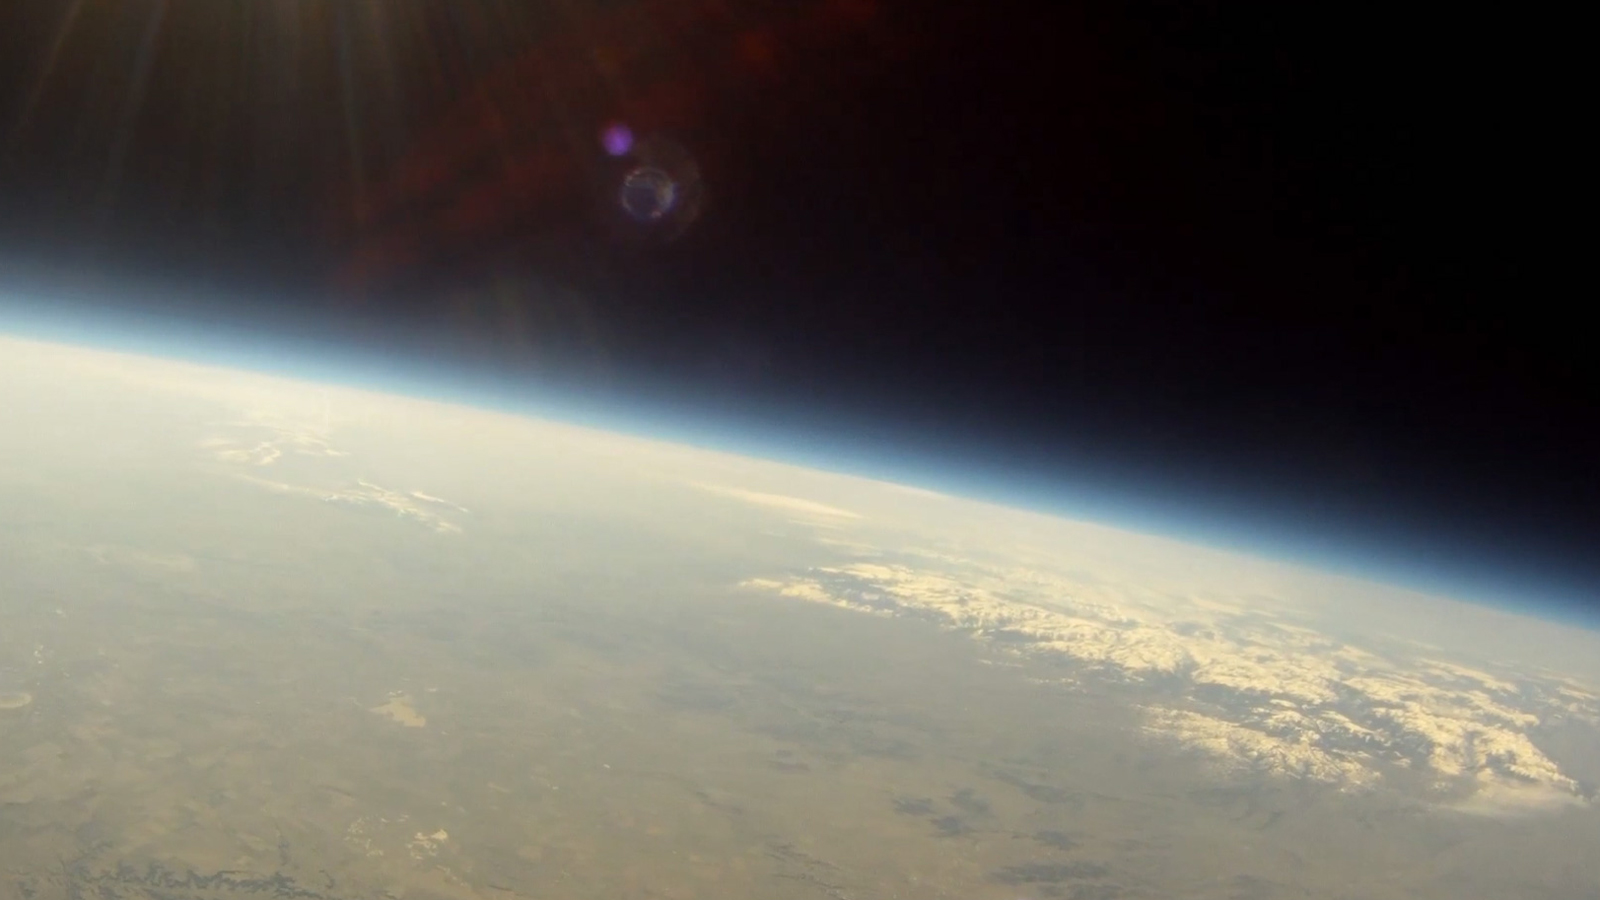 This picture of Montana was taken from the stratosphere (84,000 feet or 25,000 meters) during one of Montana Space Grant Consortium's high-altitude balloon tests on April 19, 2014.